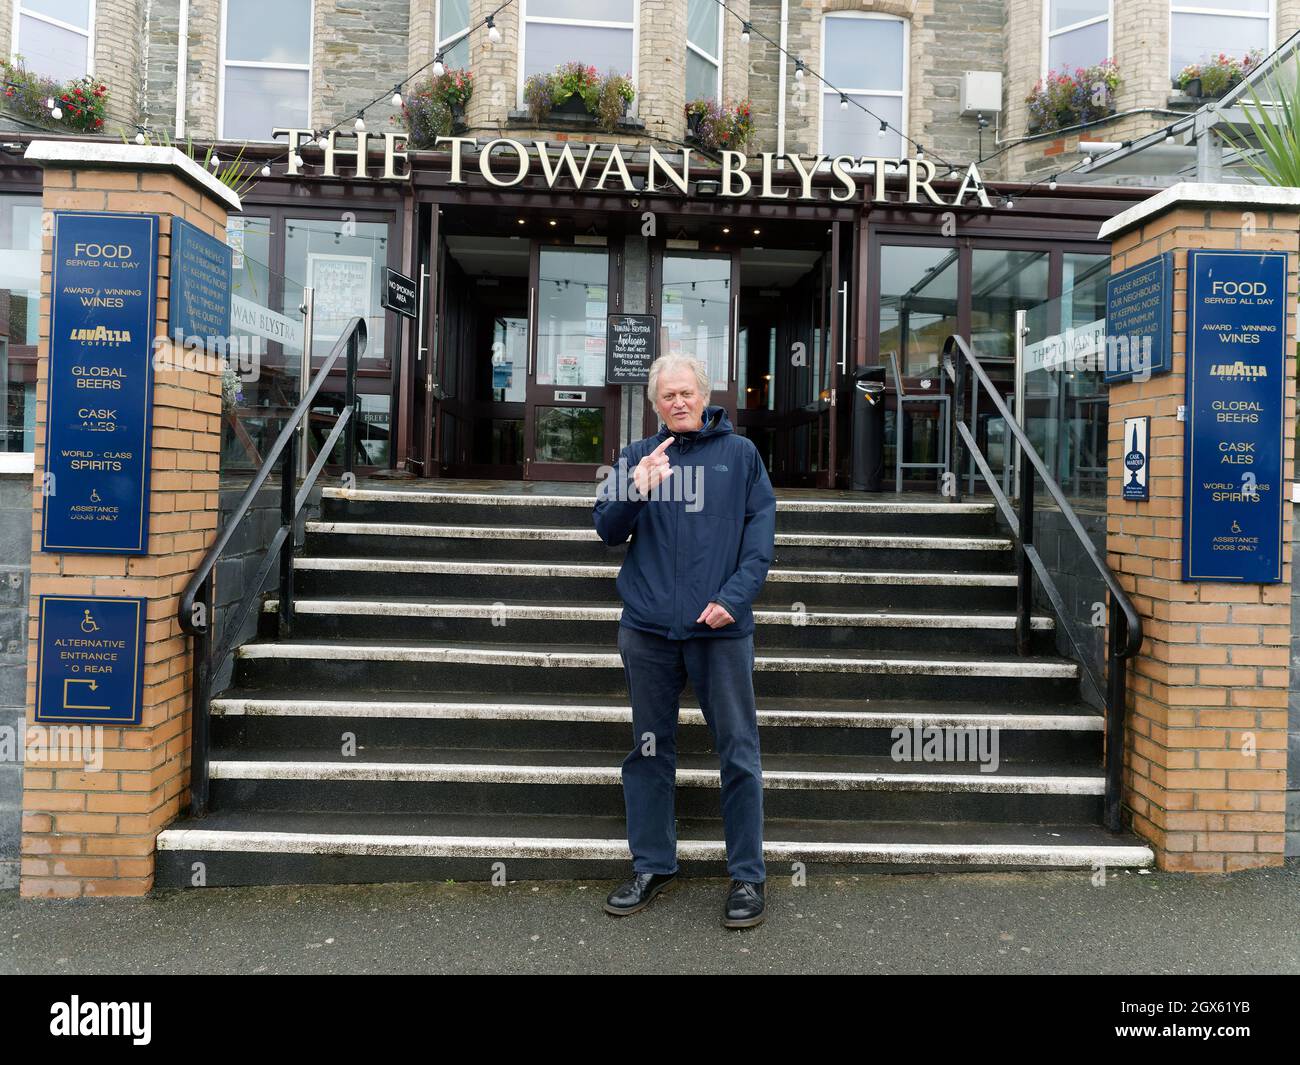 Cornwall UK, Newquay. Wetherspoons pub empire founderTim Martin visits The Towan Blystra pub in Newquay. Fresh back from a visit to his favourite vacation venue on the Isles of Scilly. Tim had a friendly chat with the manager and selected staff, taking copious notes for reference. The chain has just posted losses due to Covid. Tim Martin is also concerned about the difficulty of recruiting and retaining staff in resort areas such as Newquay. The acute lack of rental accommodation in resort areas is impacting business negatively. Tim Martin tries to visit 10 or so of his pubs each week to speak Stock Photo